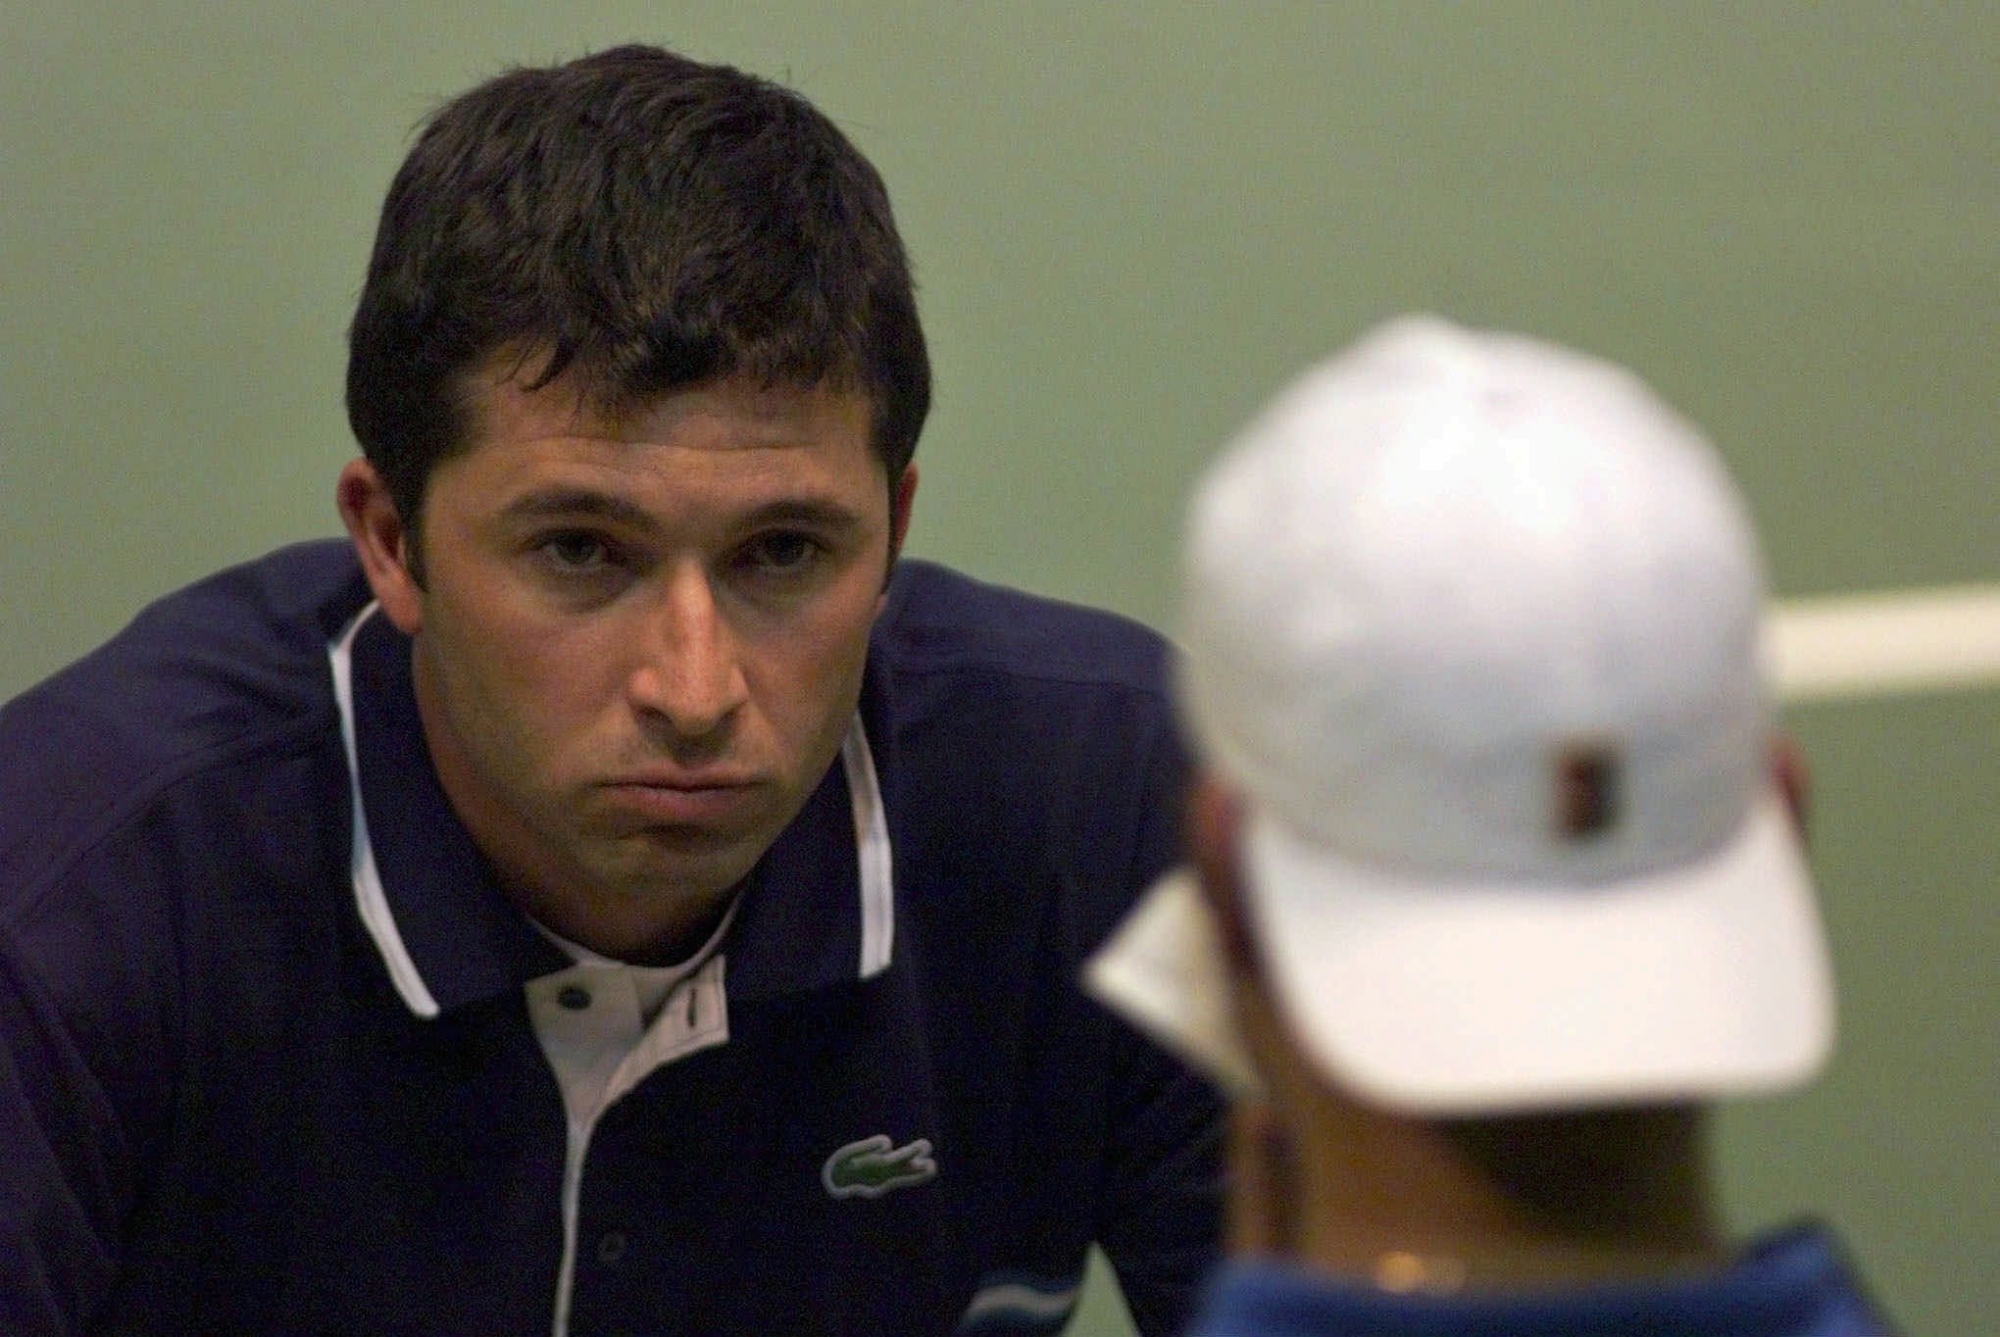 Swiss team captain Claudio Mezzadri, left, talks to his tennis player Roger Federer between games in Federer's match against Davide Sanguinetti of Italy in the Davis Cup round Switzerland vs Italy, Friday, April 2, 1999 in Neuchatel.  (ELECTRONIC IMAGE)  (KEYSTONE/Alessandro della Valle)